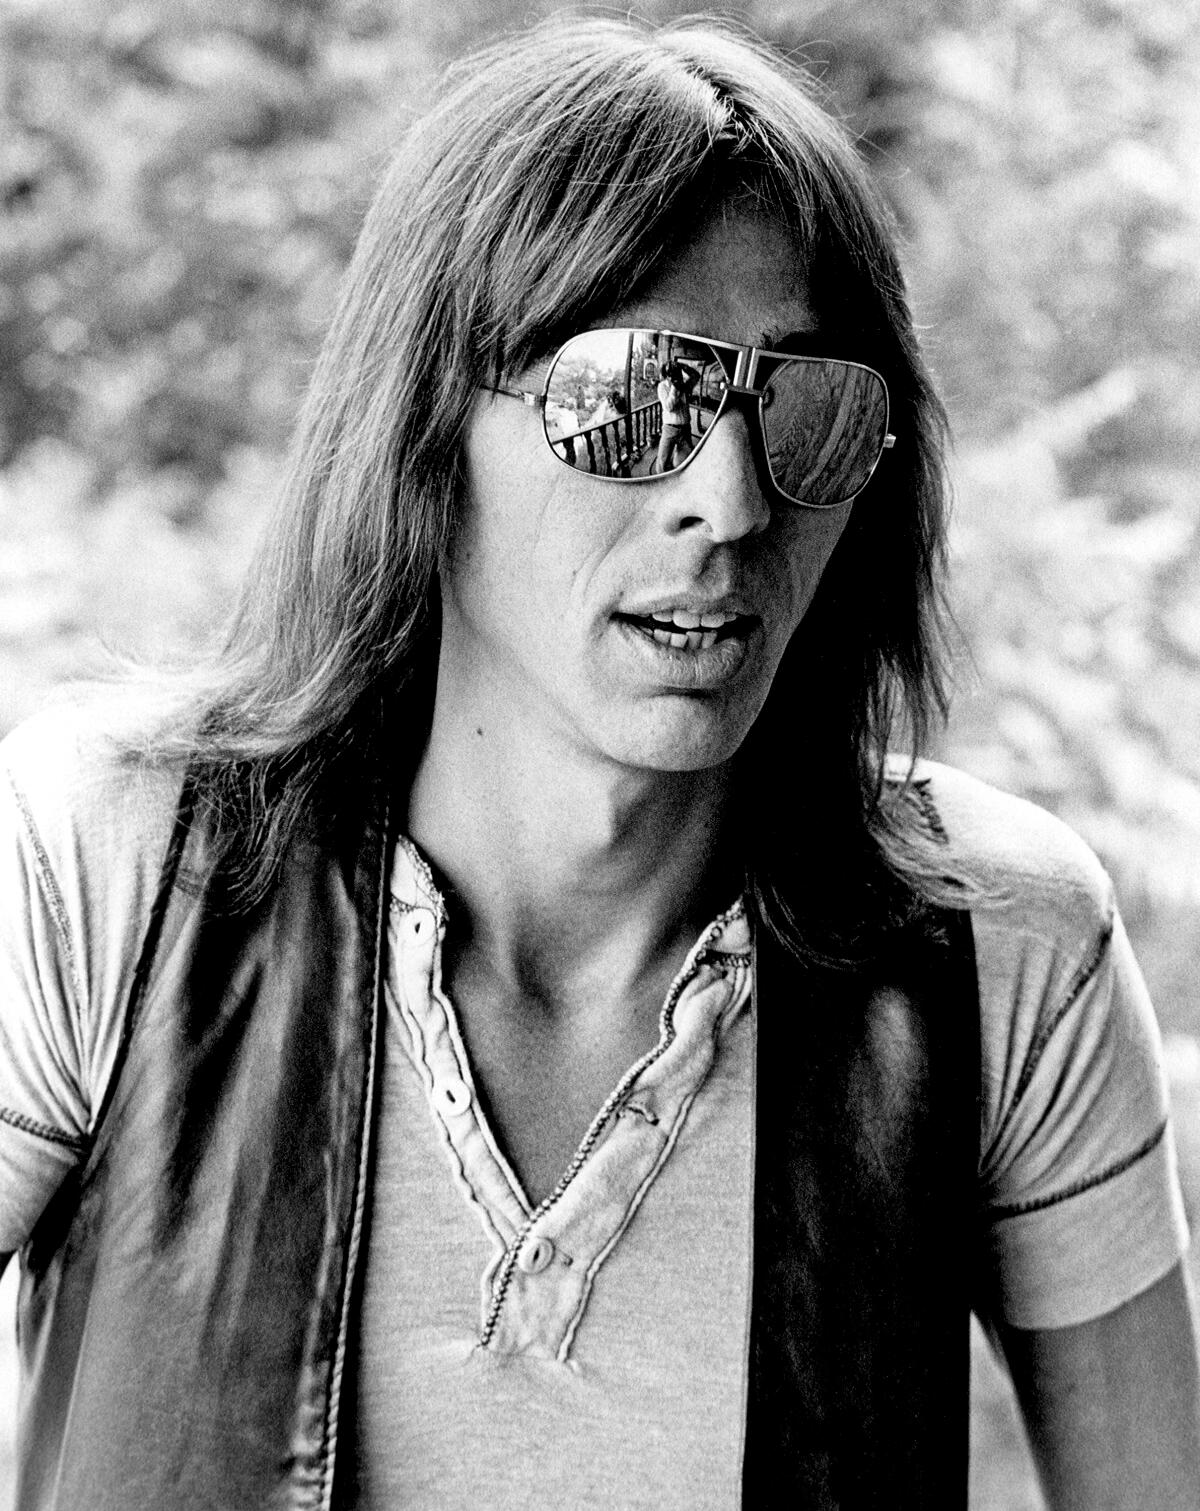 A long-haired man in sunglasses, open-necked shirt and leather vest